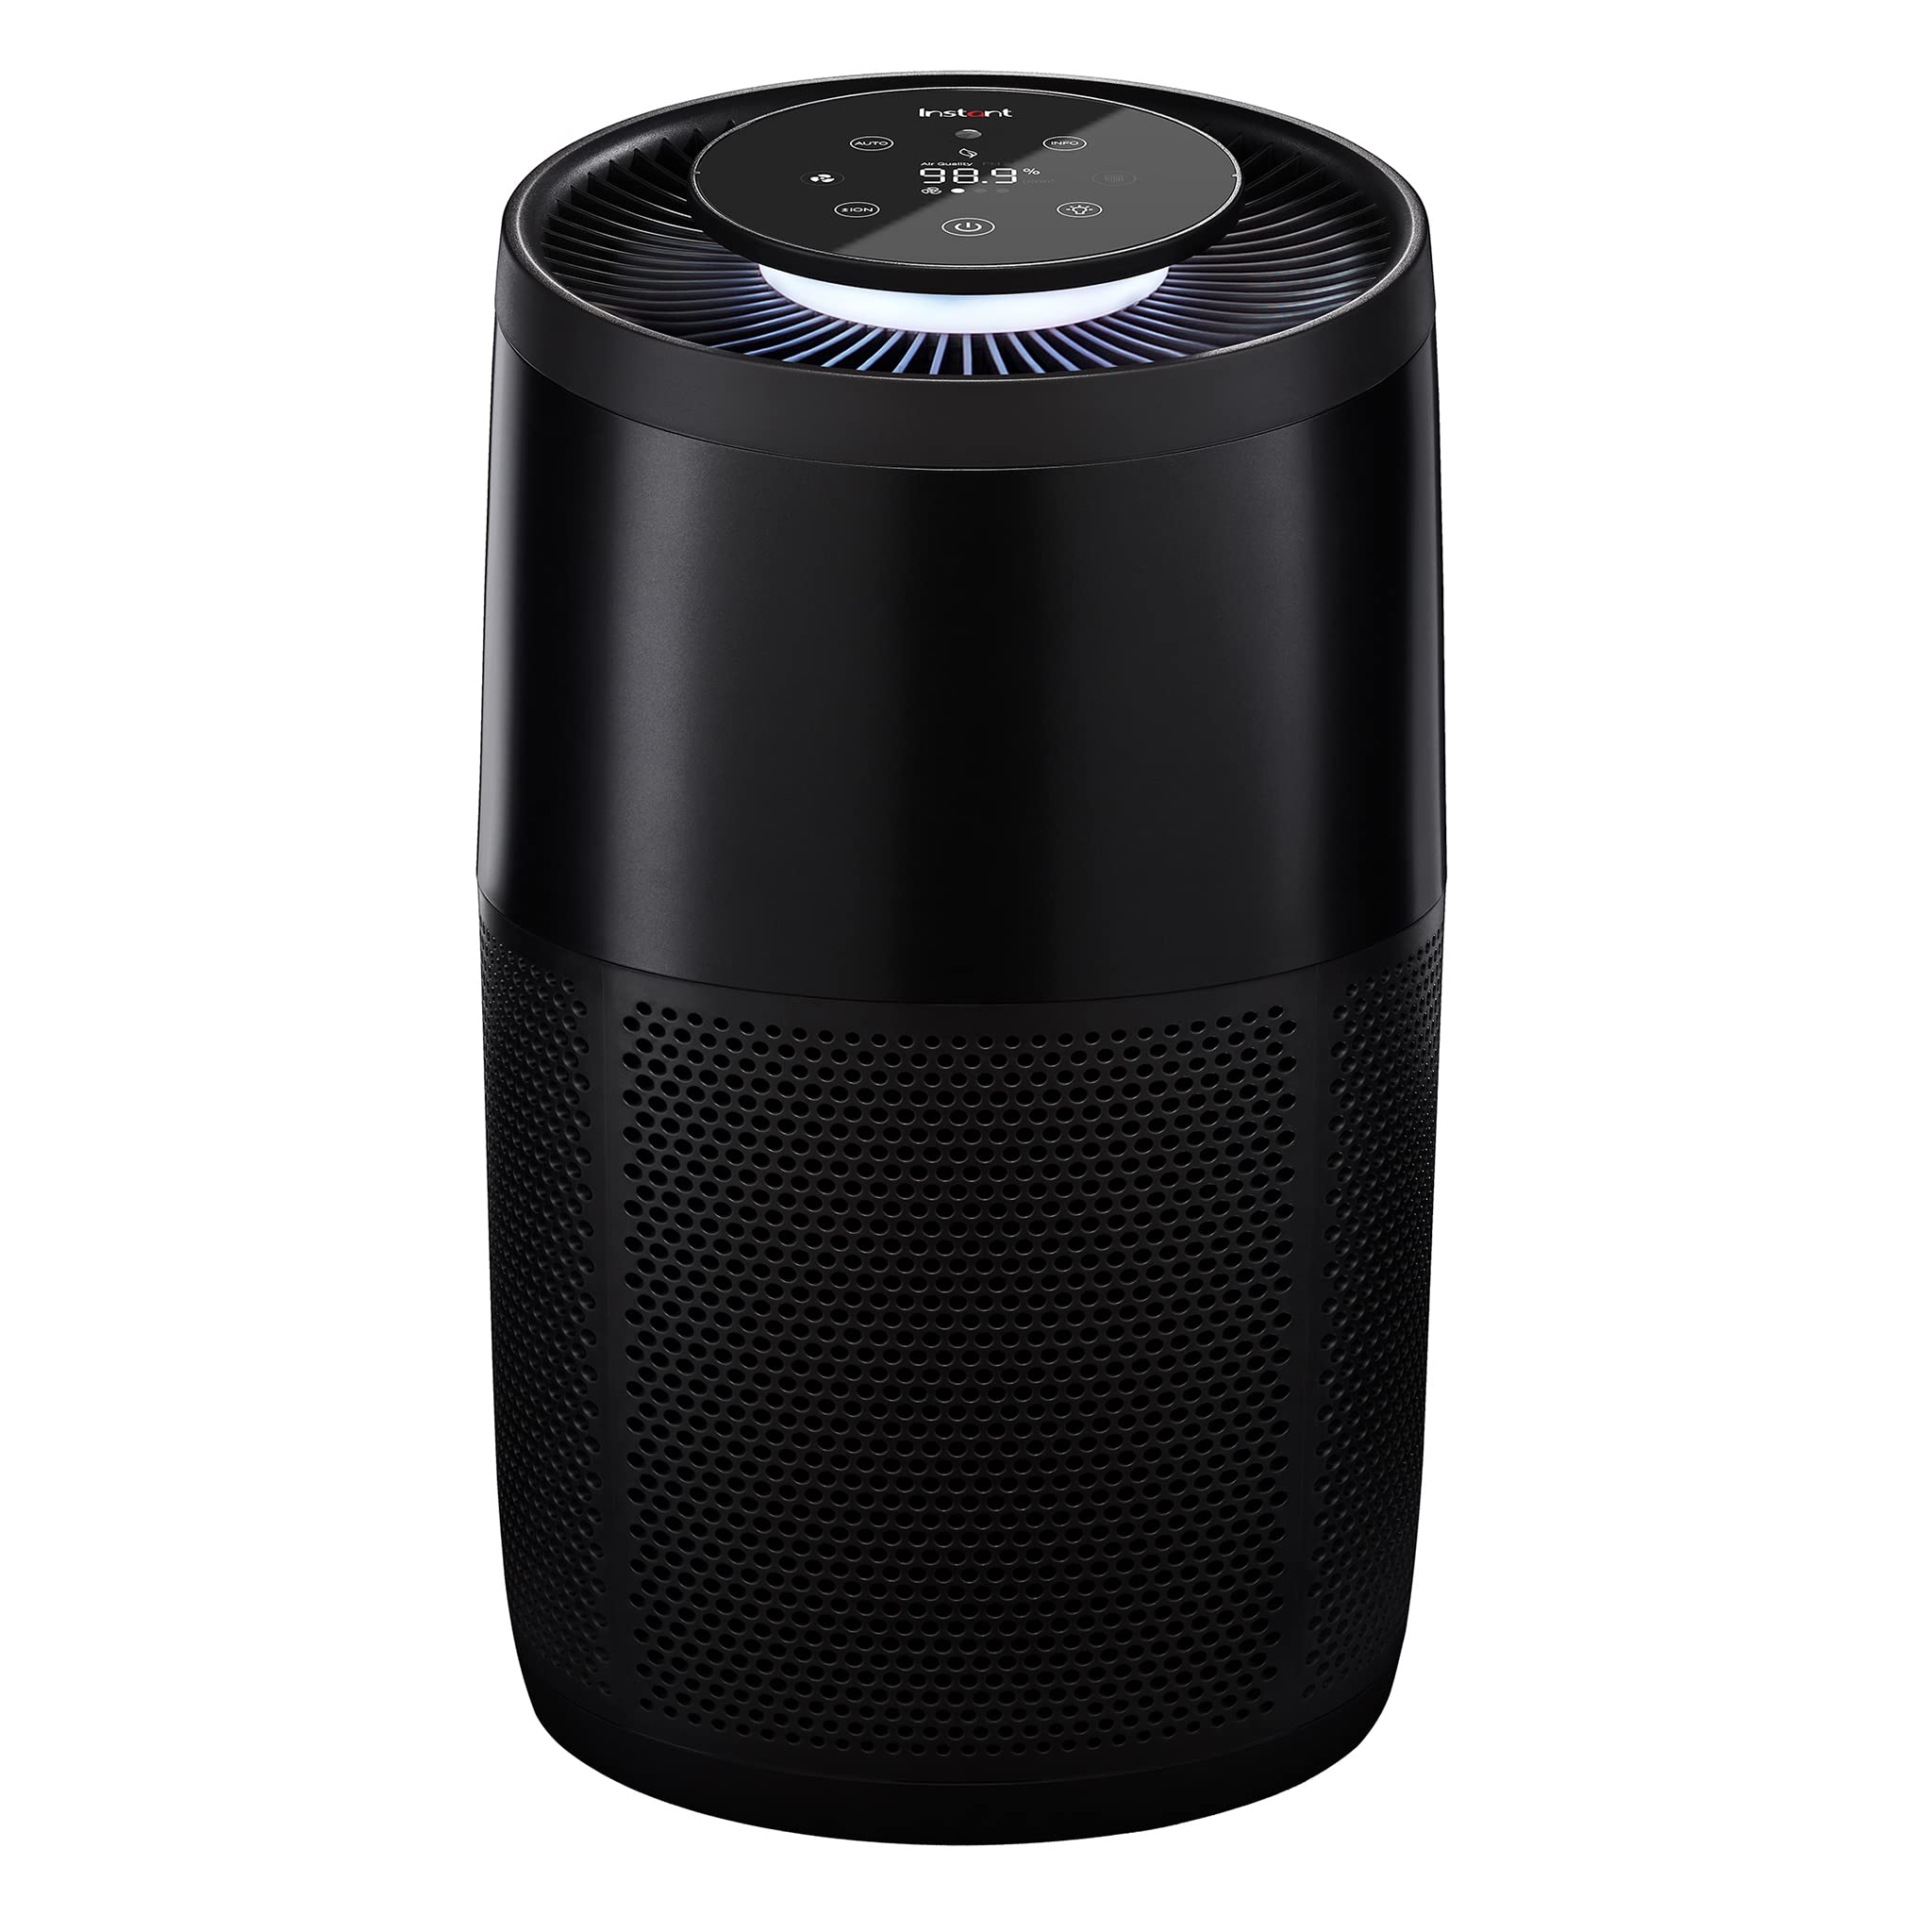 Instant Brand HEPA Quiet Air Purifier w/Plasma Ion Technology $40.79 + Free Shipping